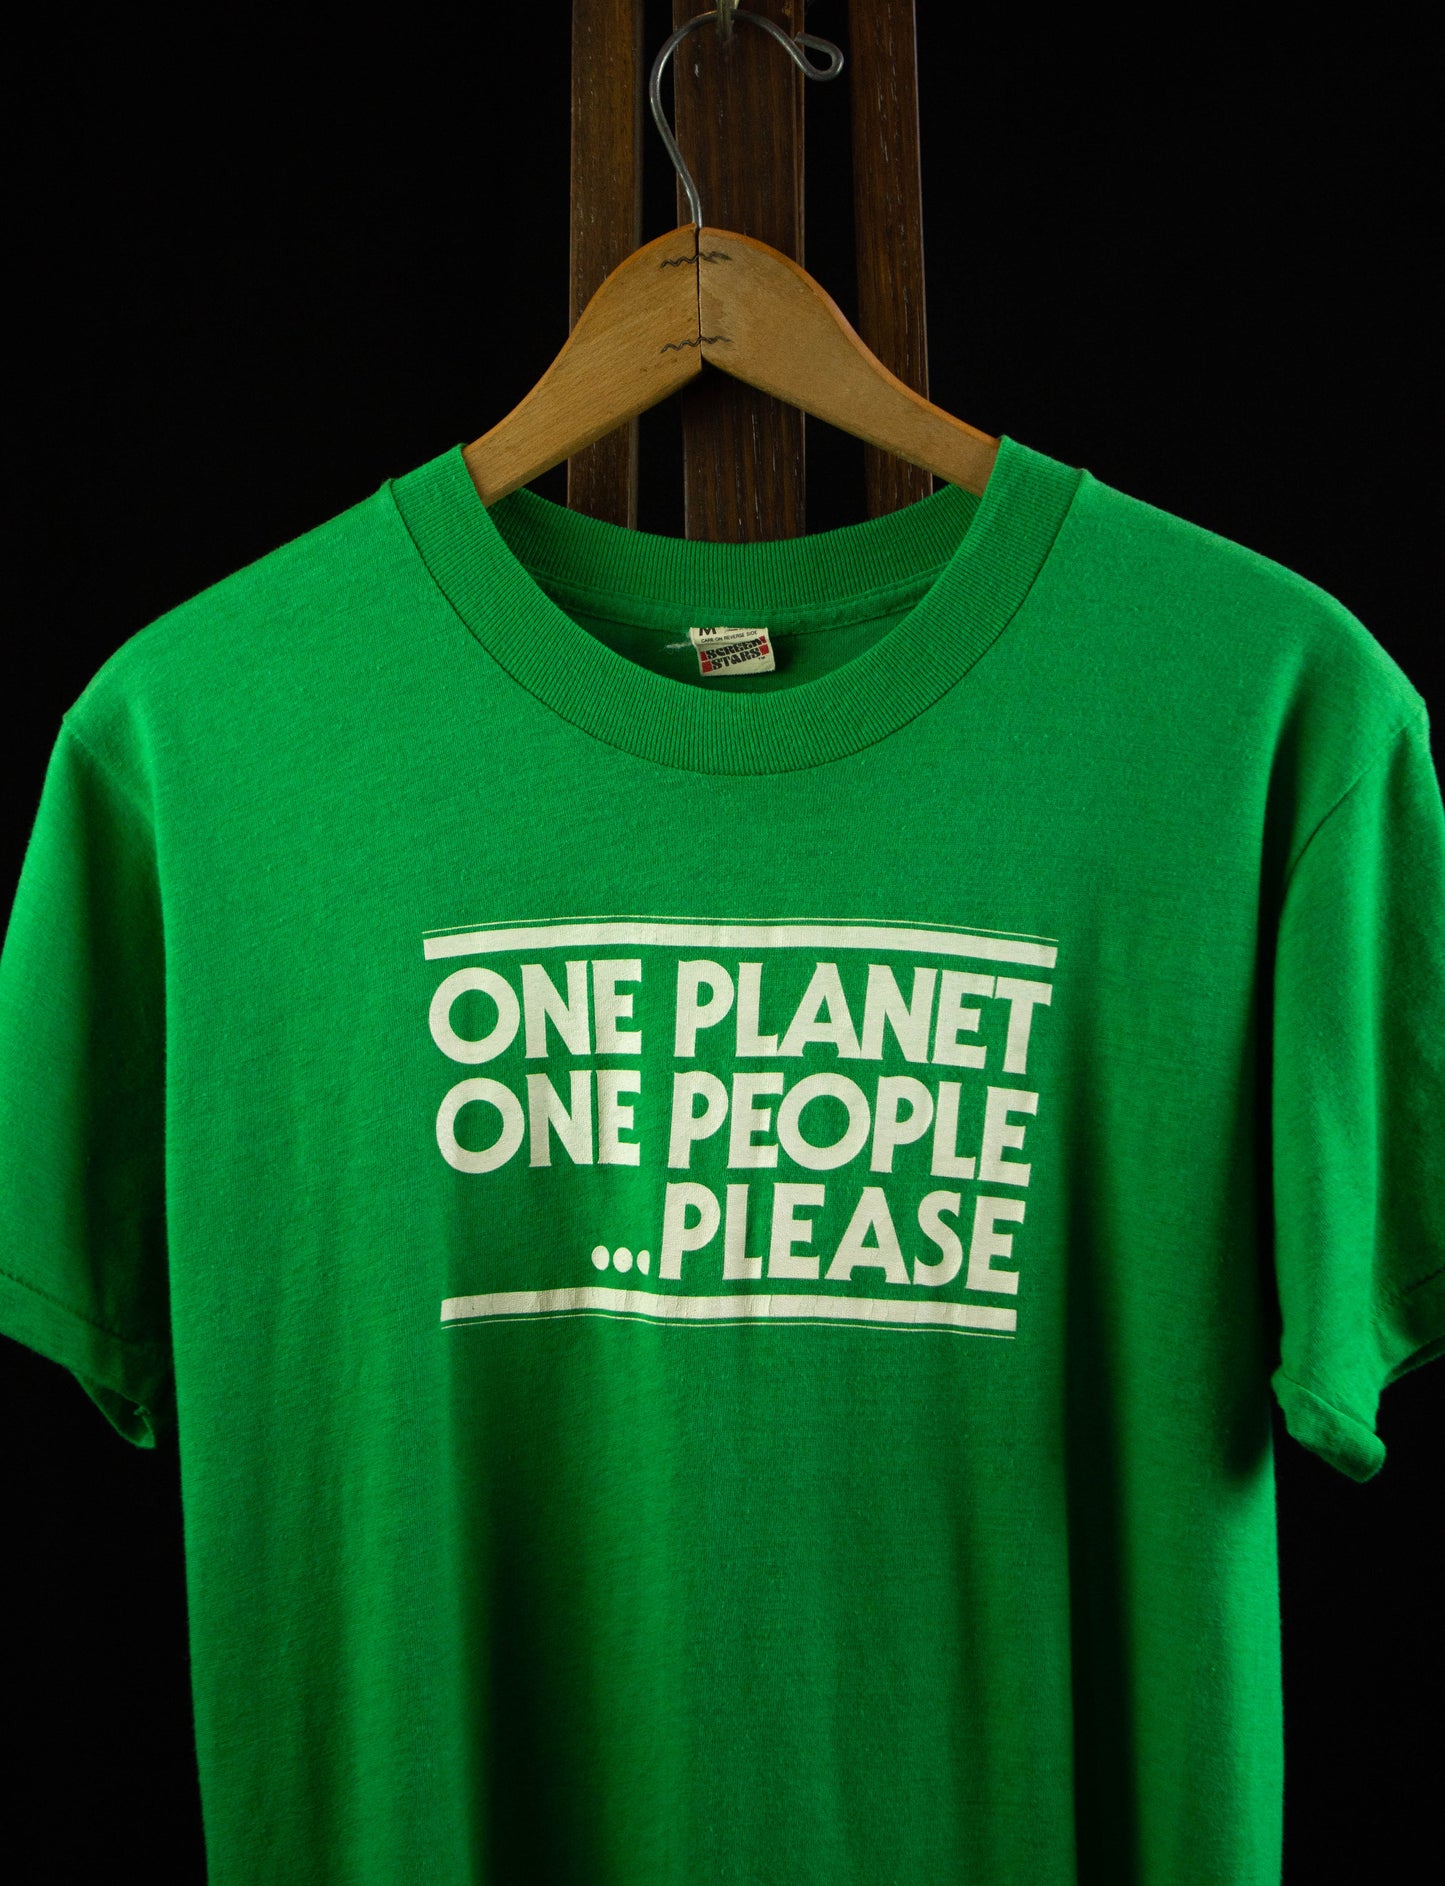 Vintage One Planet One People...Please Graphic T Shirt 80s Green and White Small-Medium